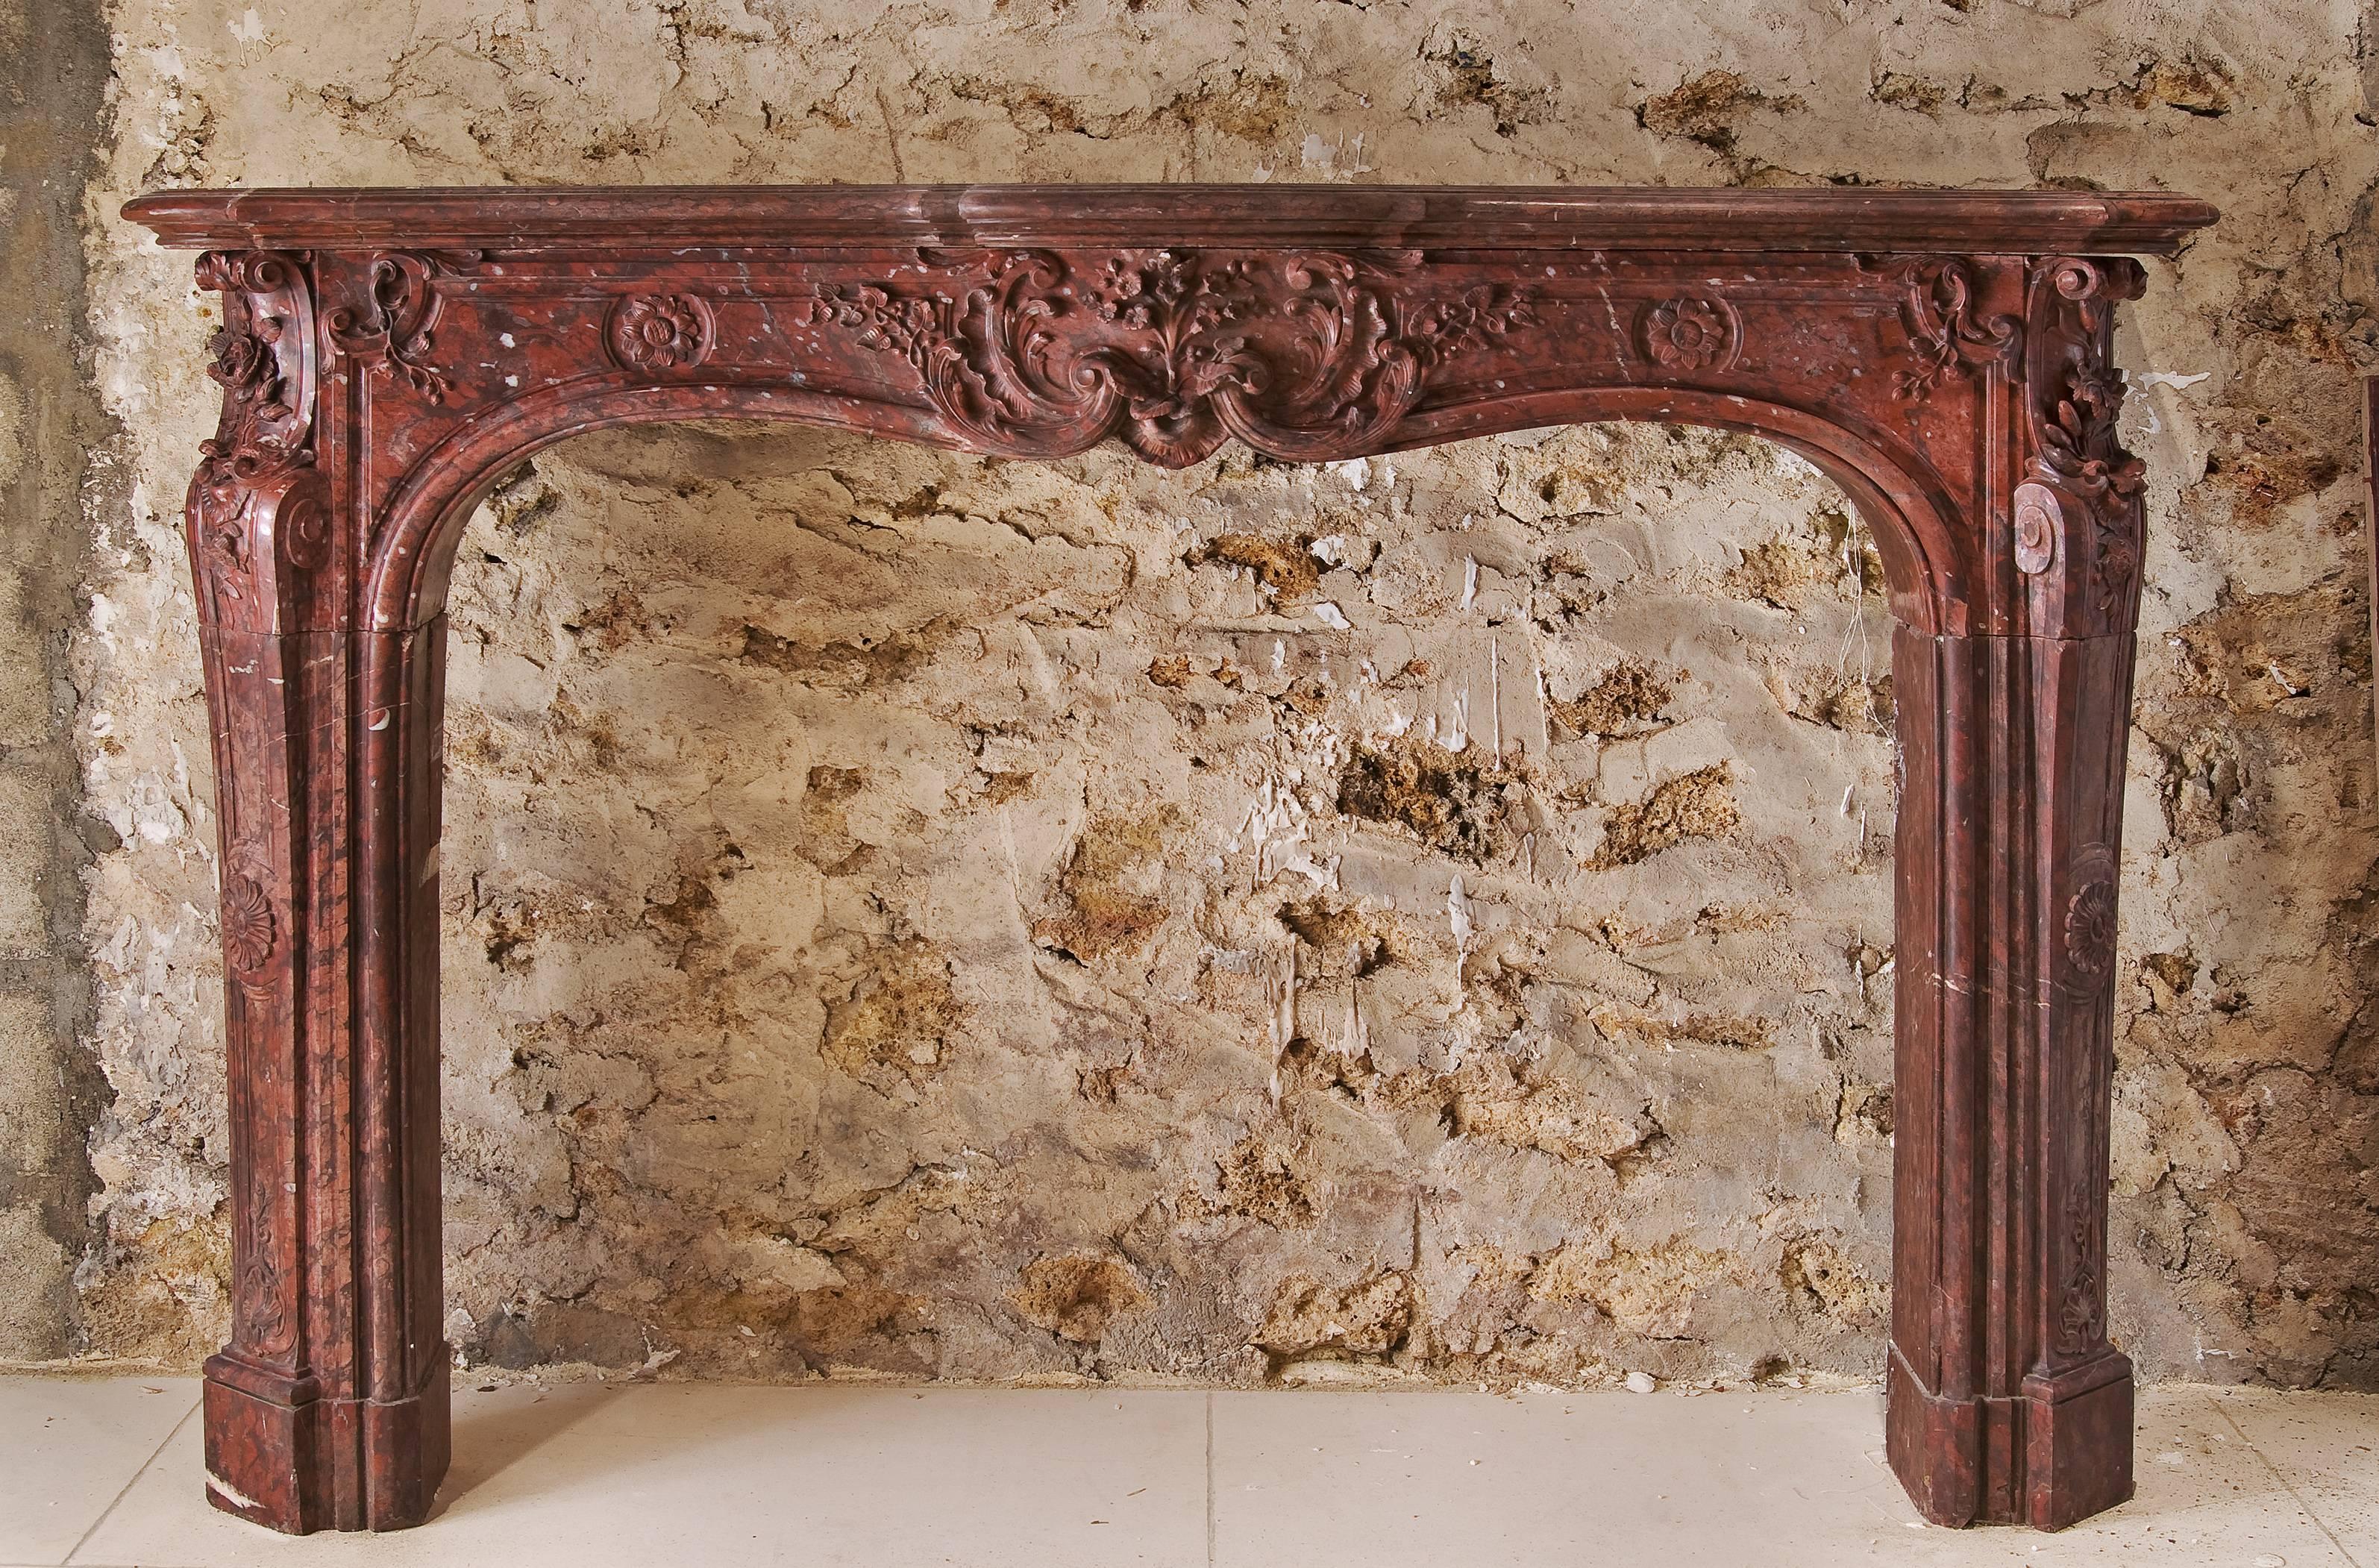 A beautiful Louis XV fireplace in Morello cherry marble from the French, mid-18th century.
This mantel is richly carved on its entire central frieze and again on both jambs with leaves and flowers decoration.
The jambs are sculpted on their whole